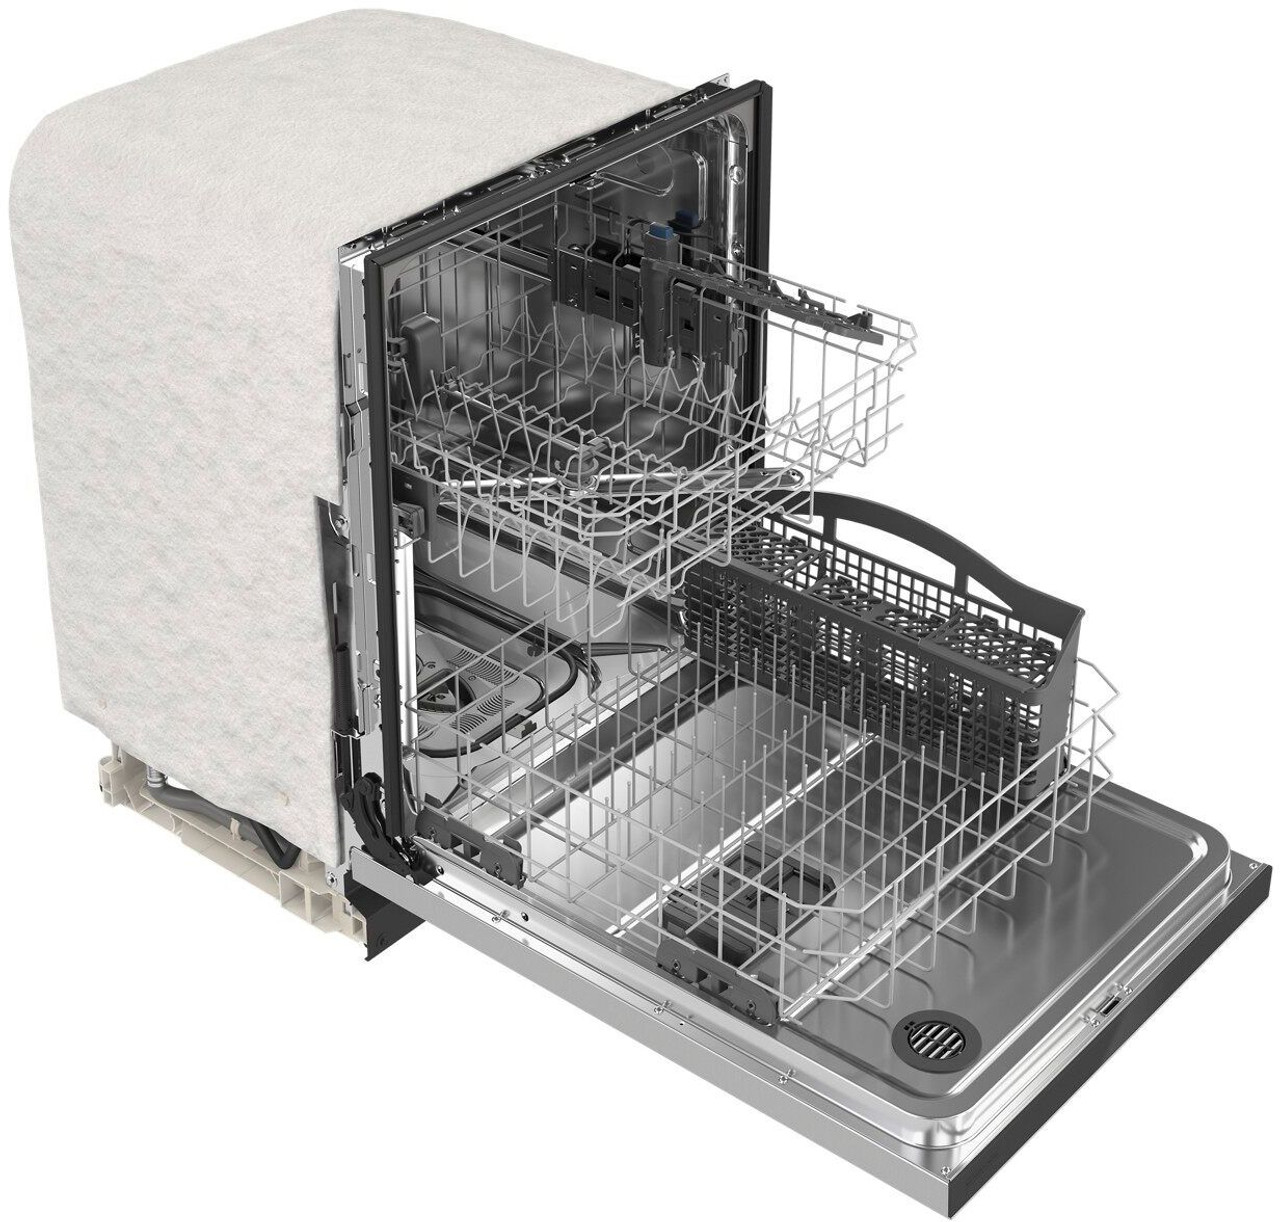 Maytag - 24" Front Control Built-In Dishwasher with Stainless Steel Tub, Dual Power Filtration, 50 dBA - Fingerprint Resistant Stainless Steel